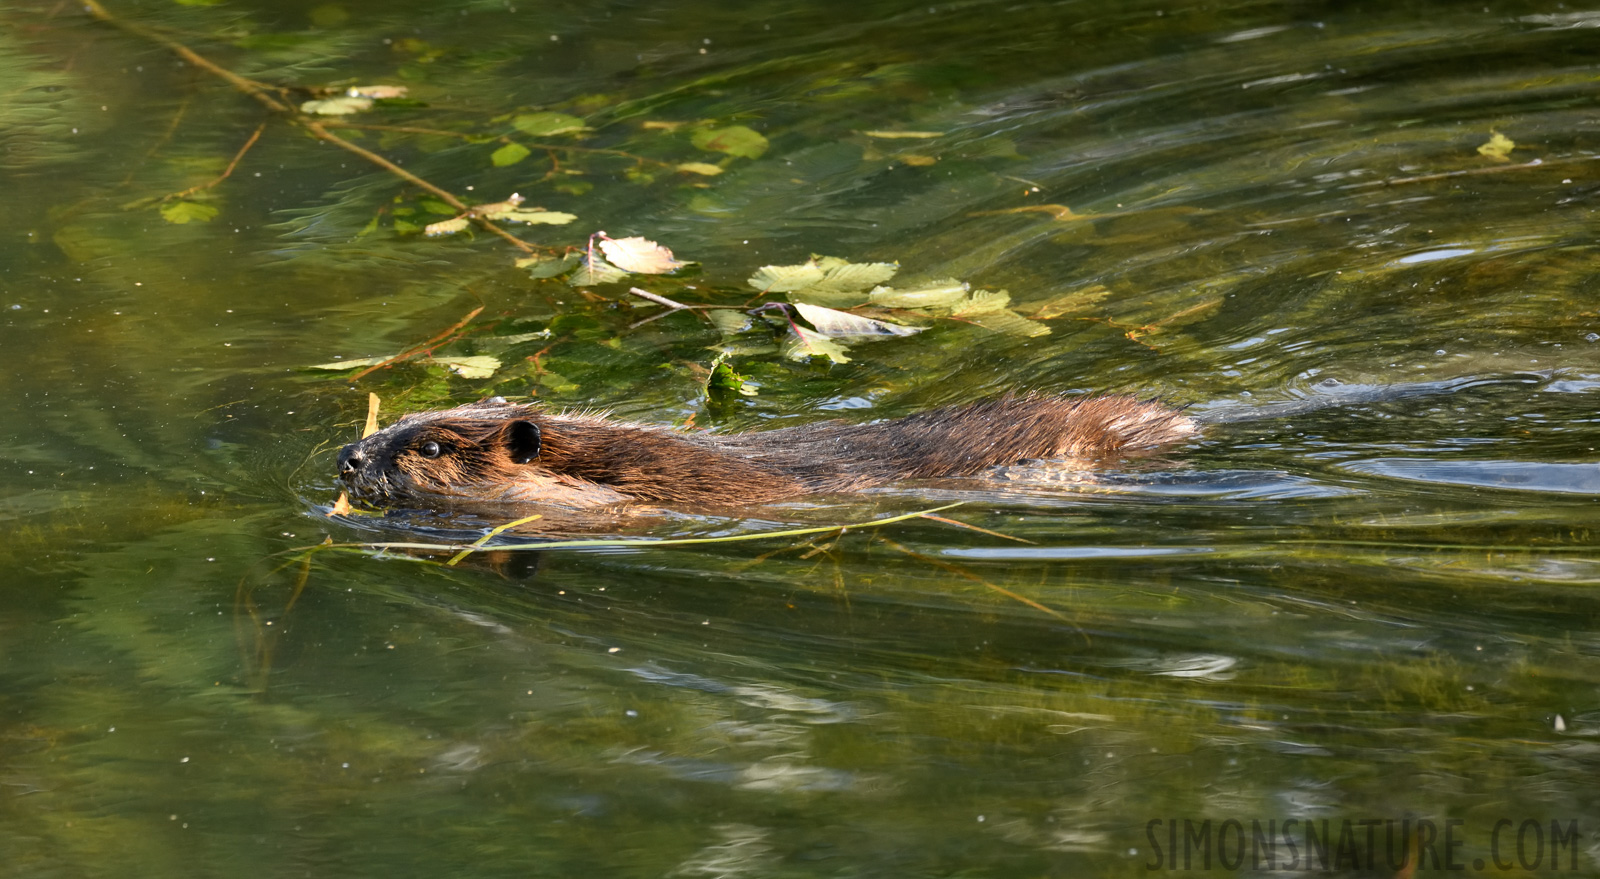 Castor canadensis [400 mm, 1/320 sec at f / 8.0, ISO 1600]